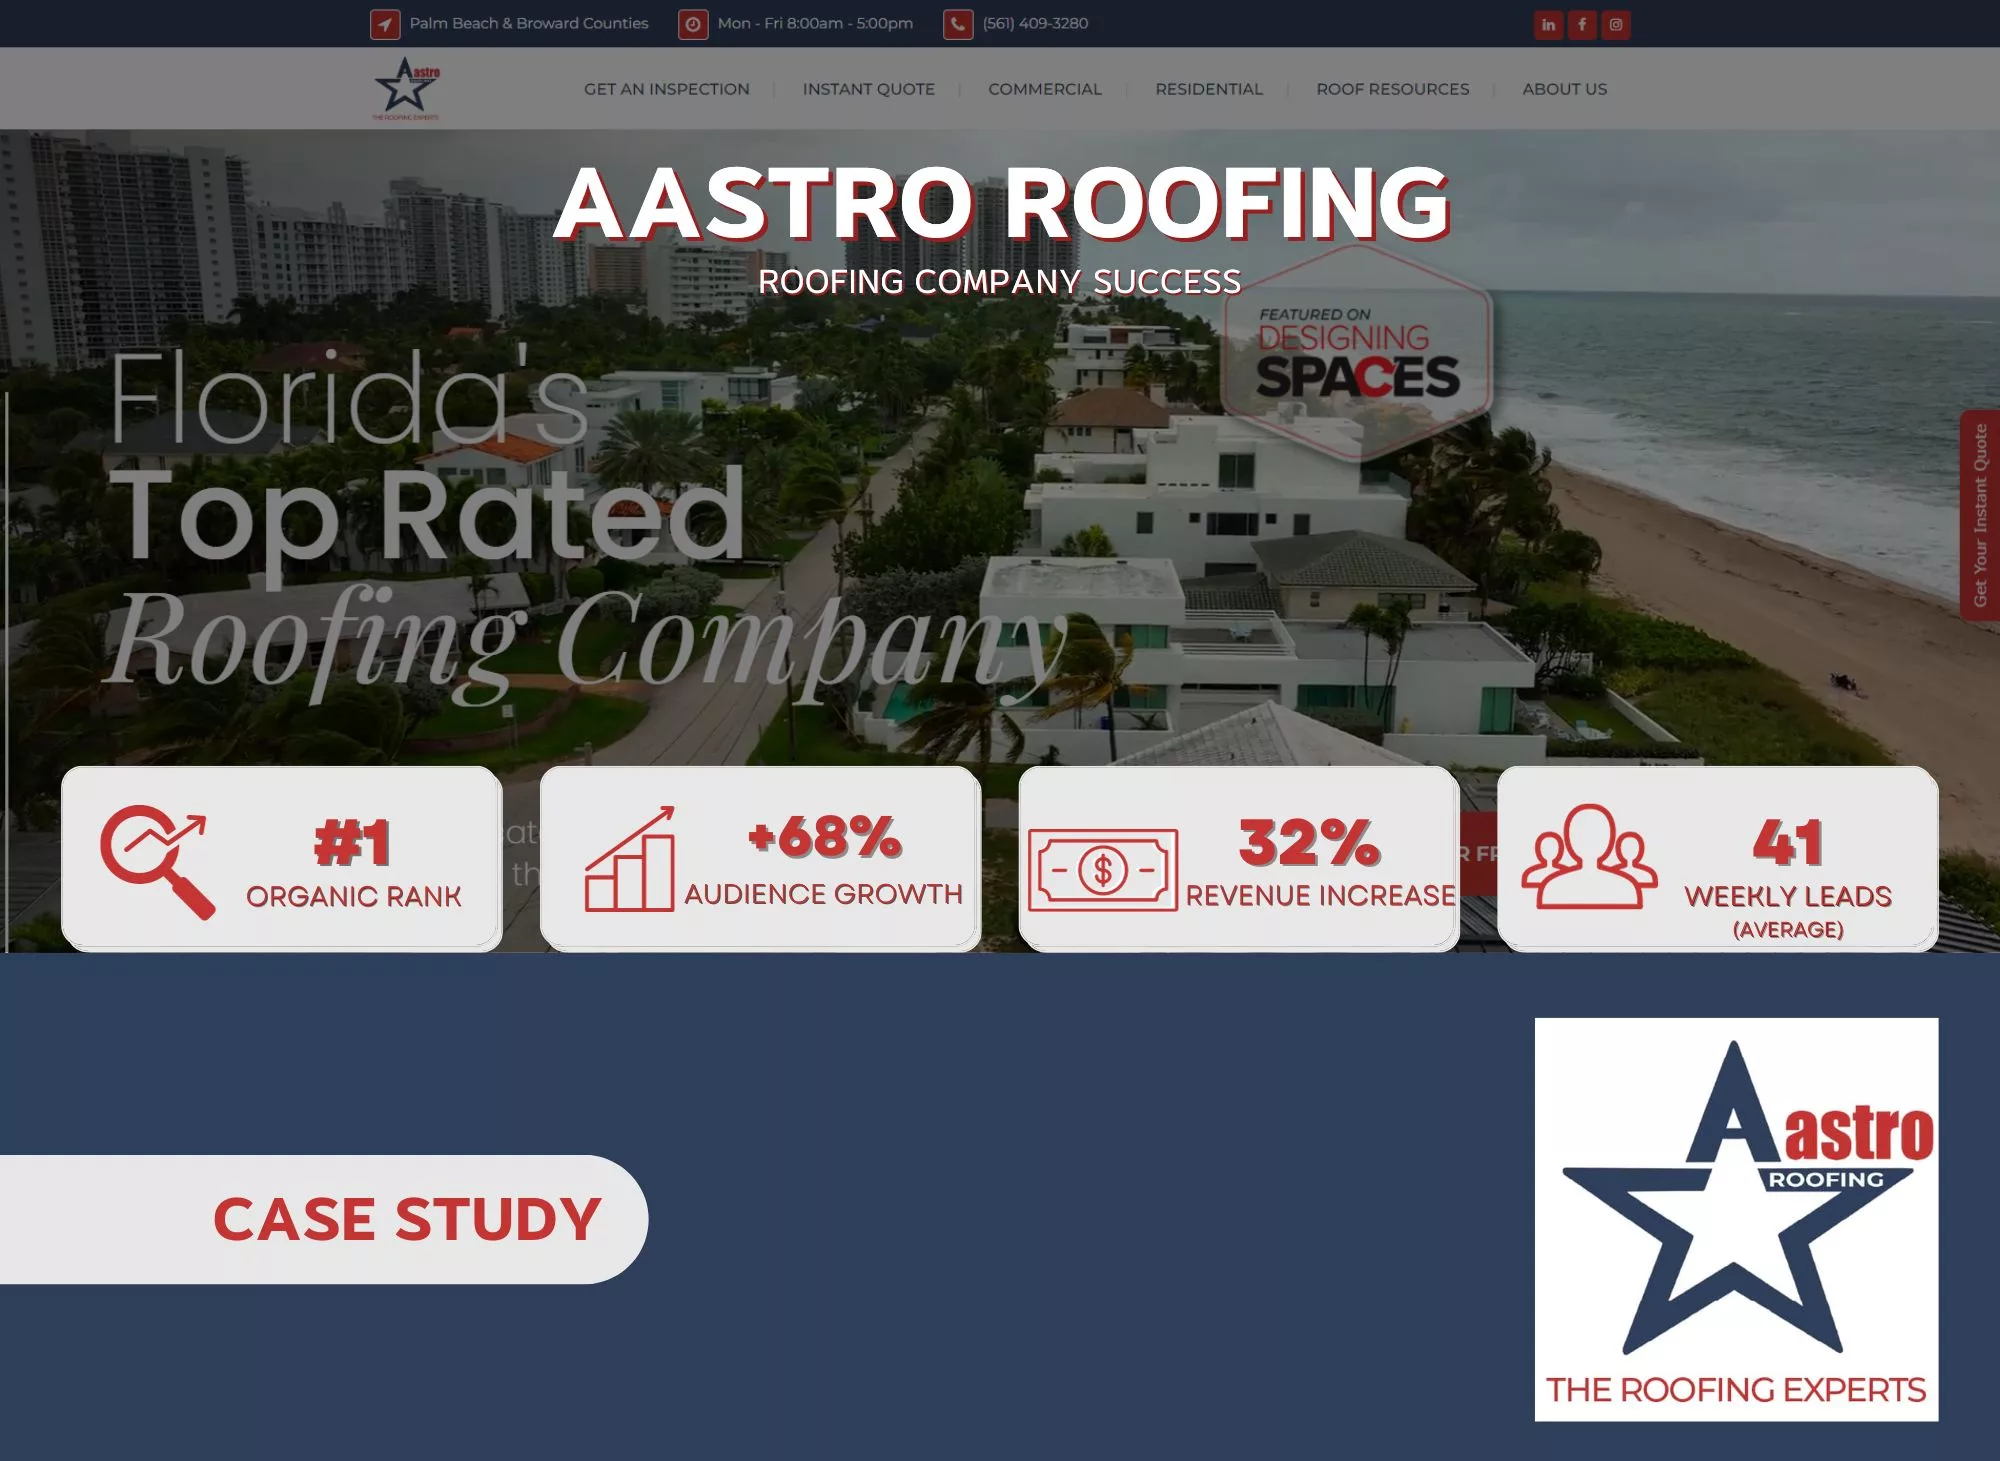 Graphic of Aastro Roofing - Roofers Case Study for Digital Marketing